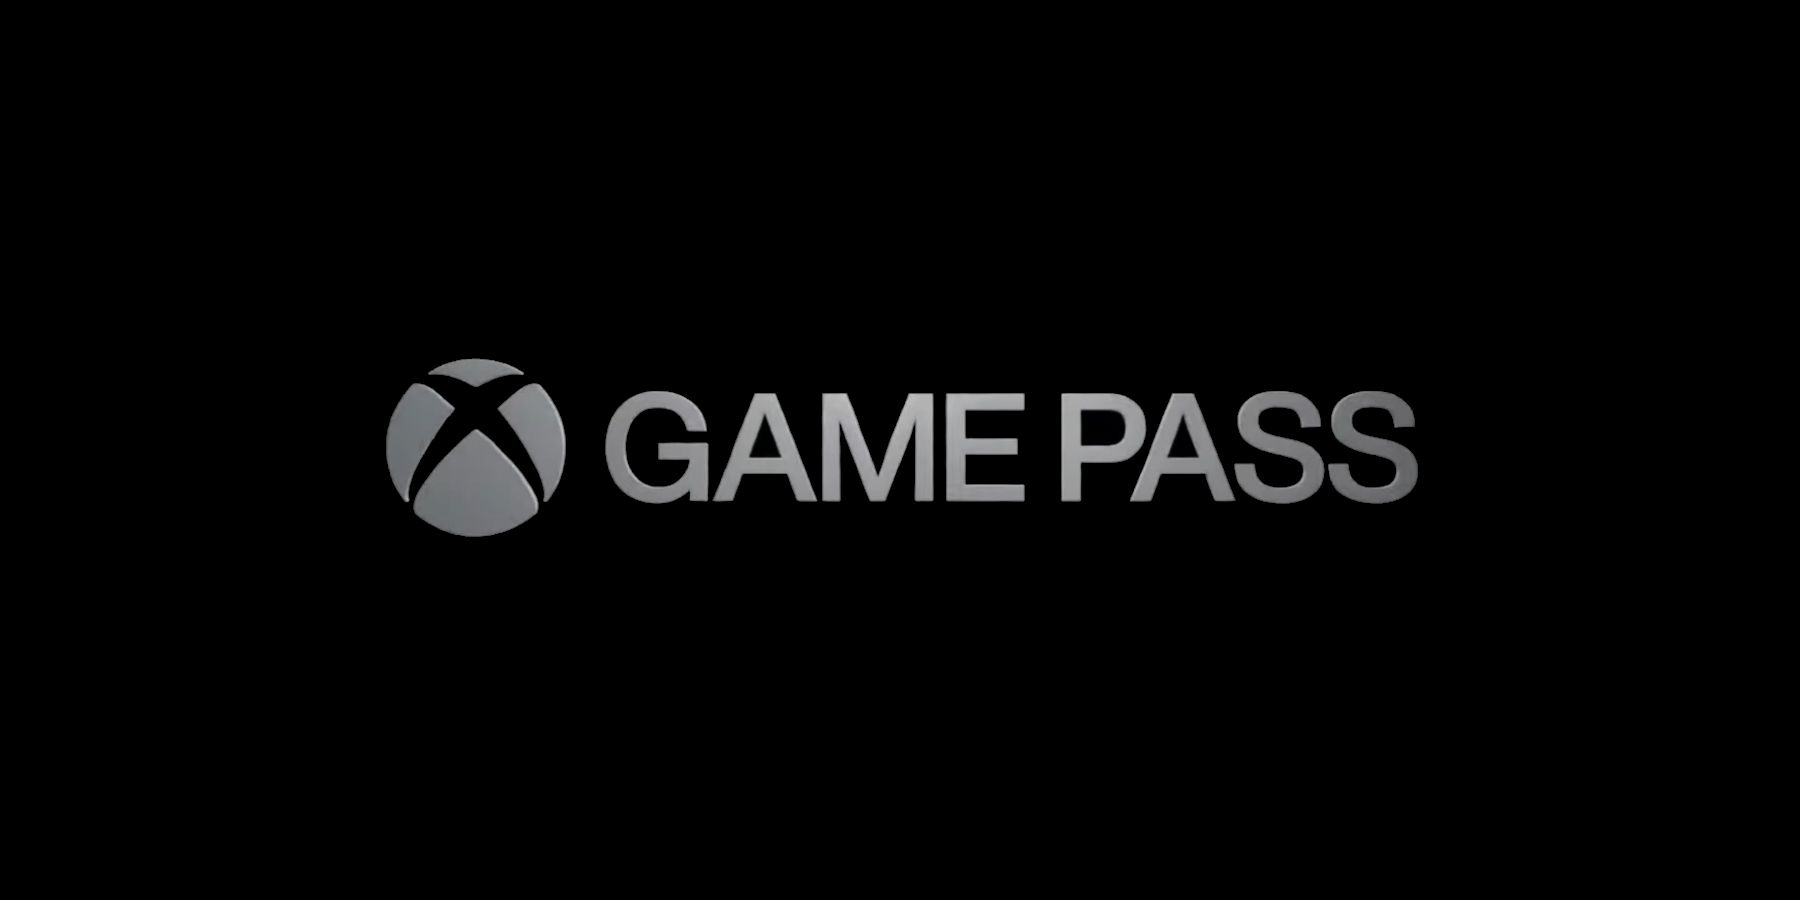 Back 4 Blood could come to Xbox Game Pass on Day 1 - Millenium